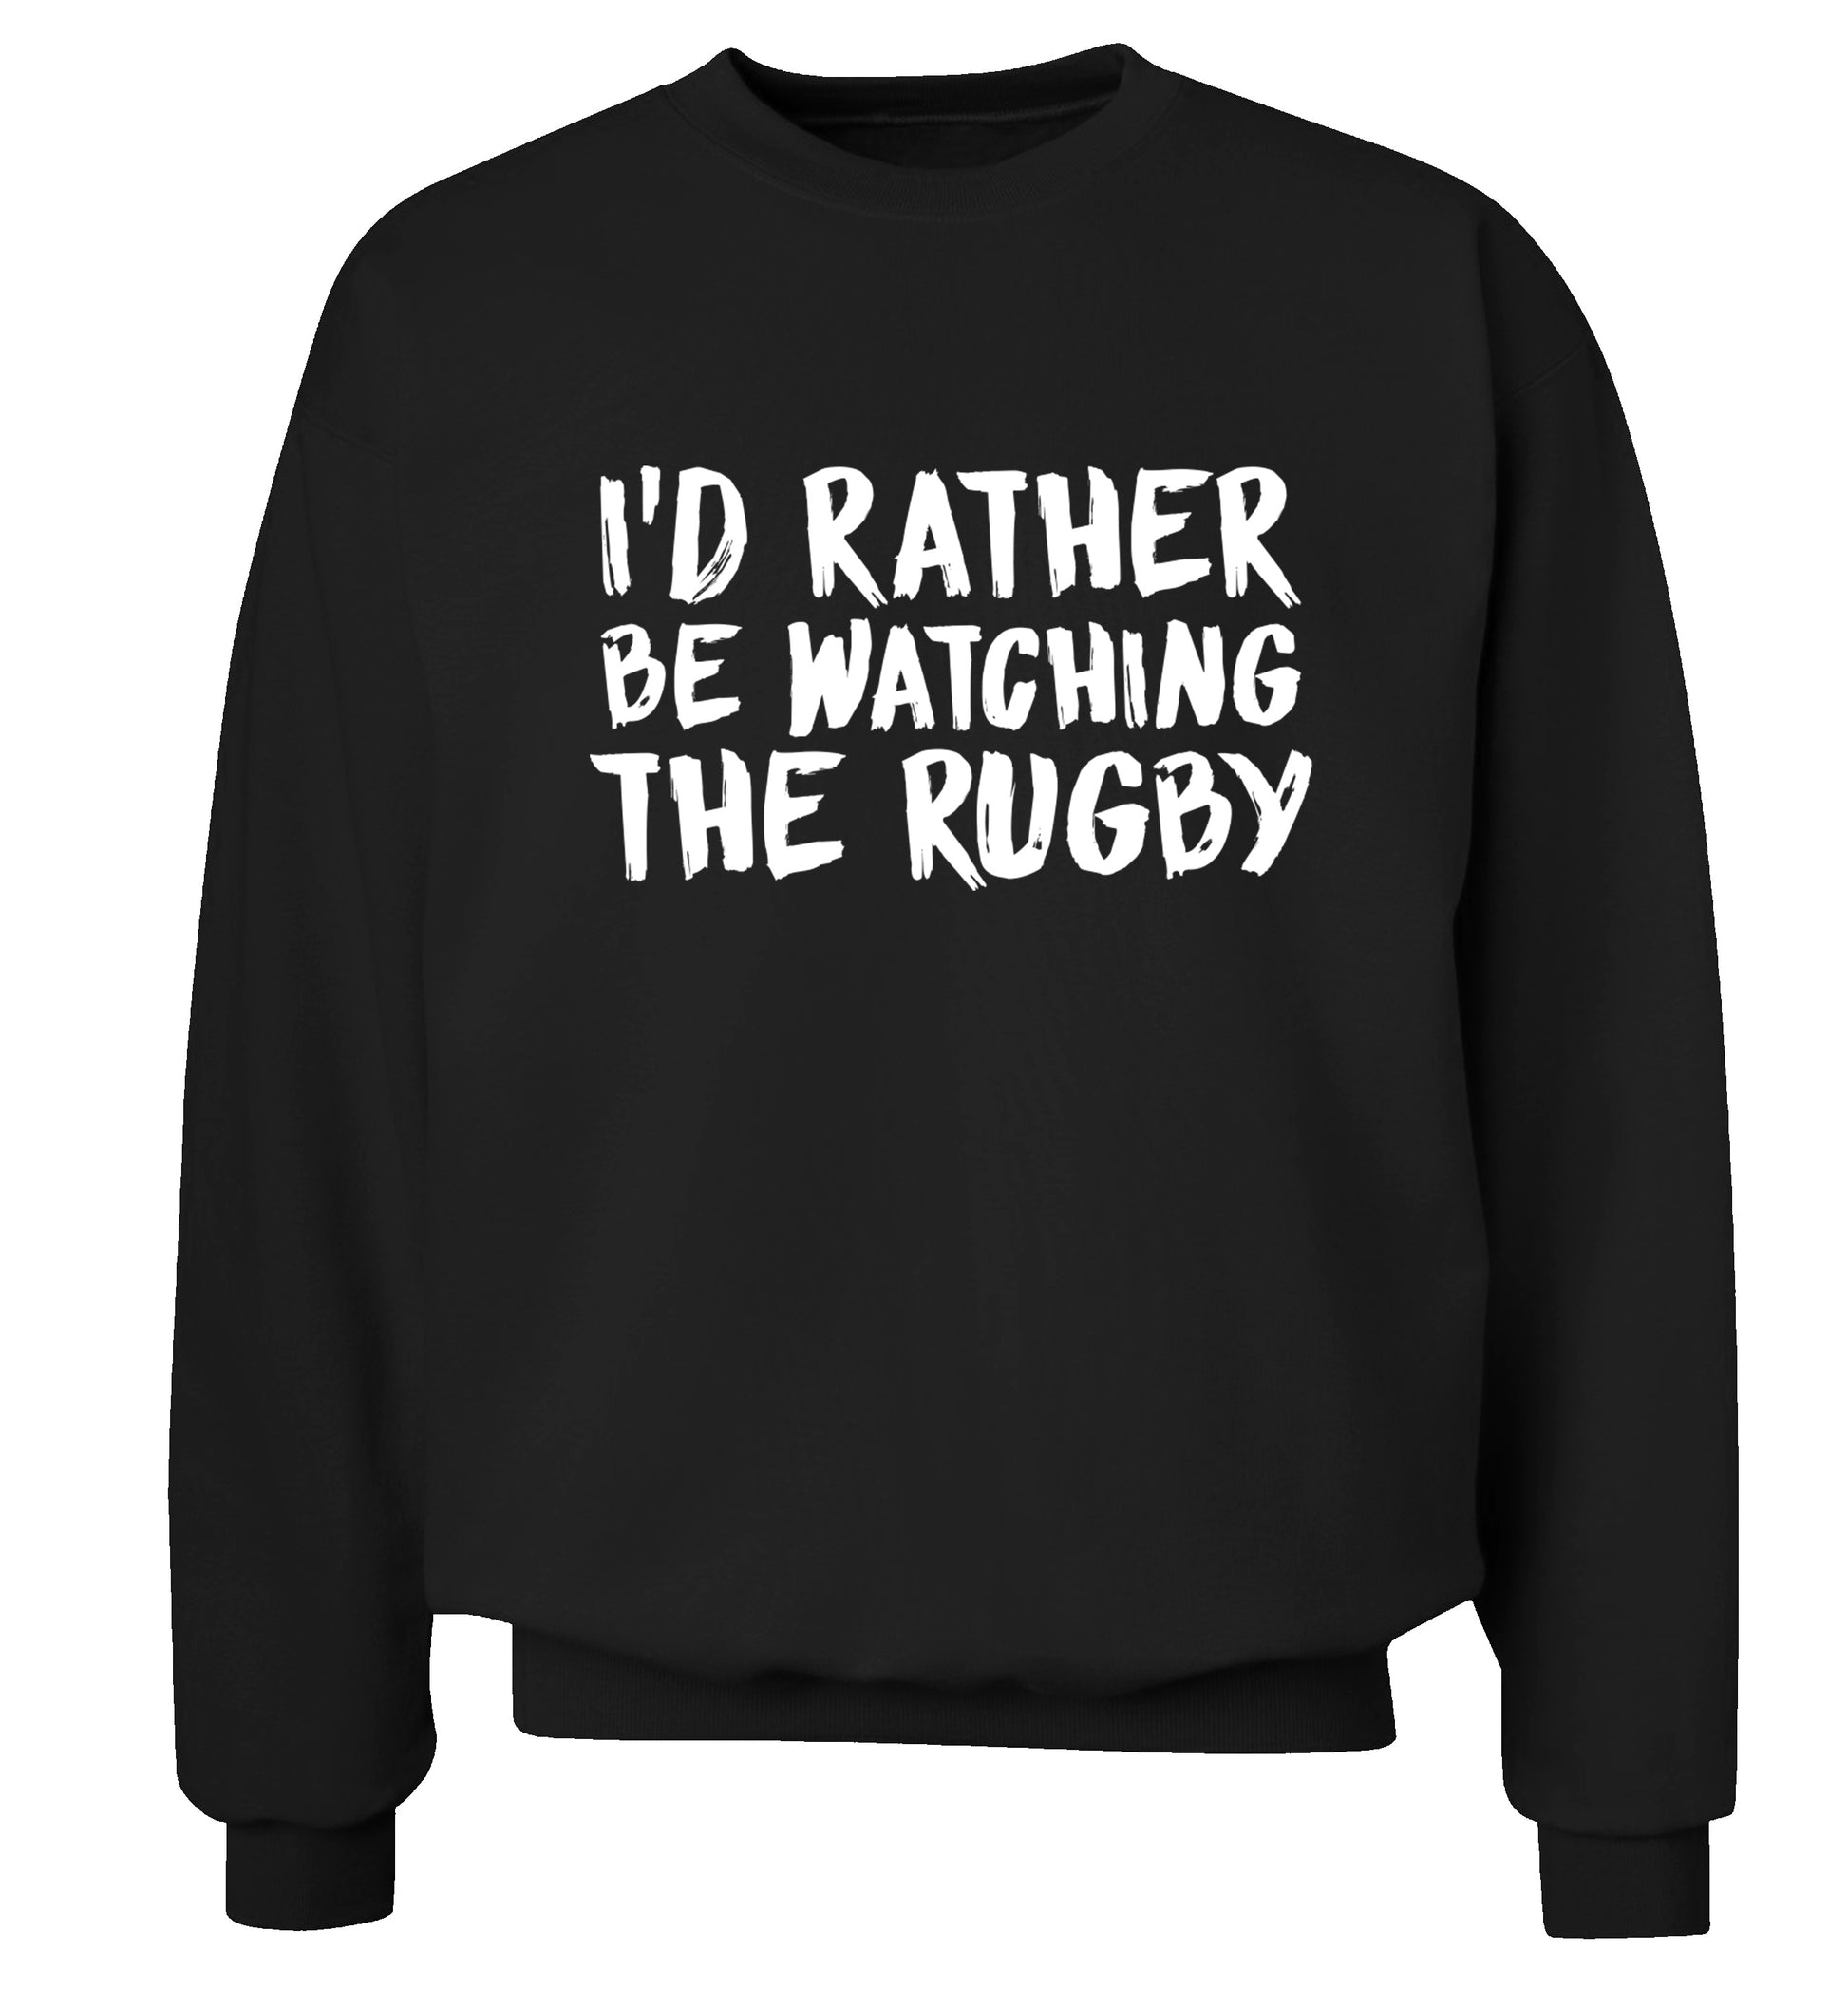 I'd rather be watching the rugby Adult's unisex black Sweater 2XL